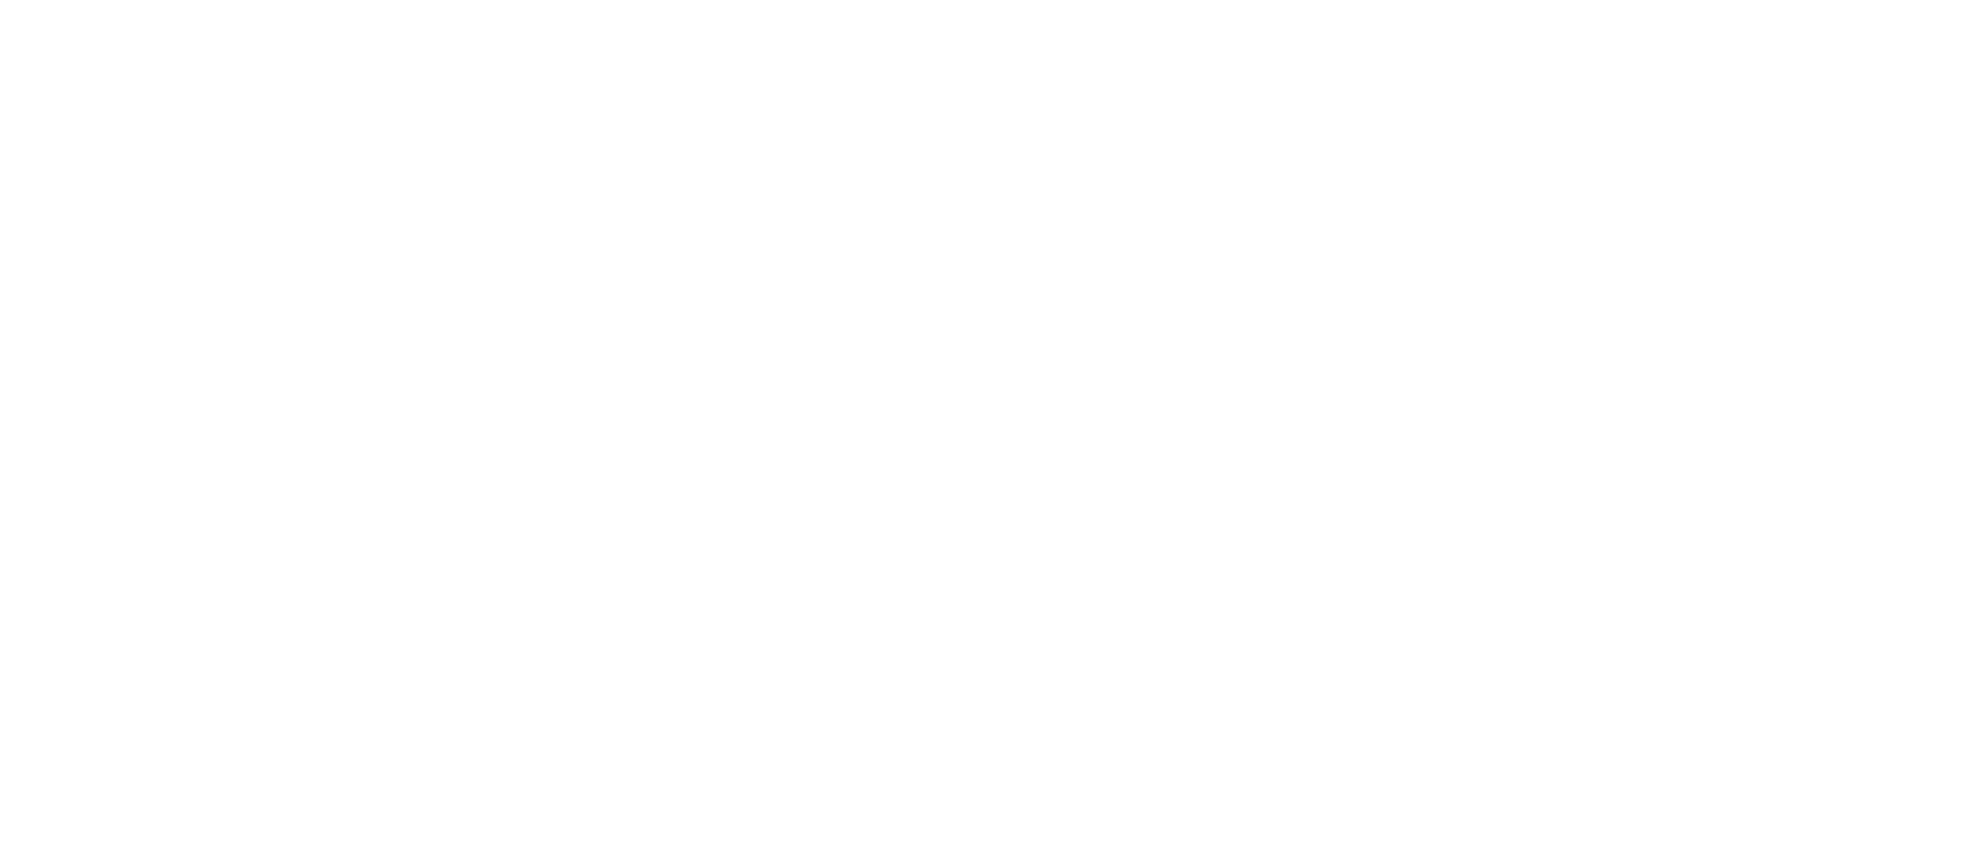 Footer Logo for Blessed Sacarament Catholic School